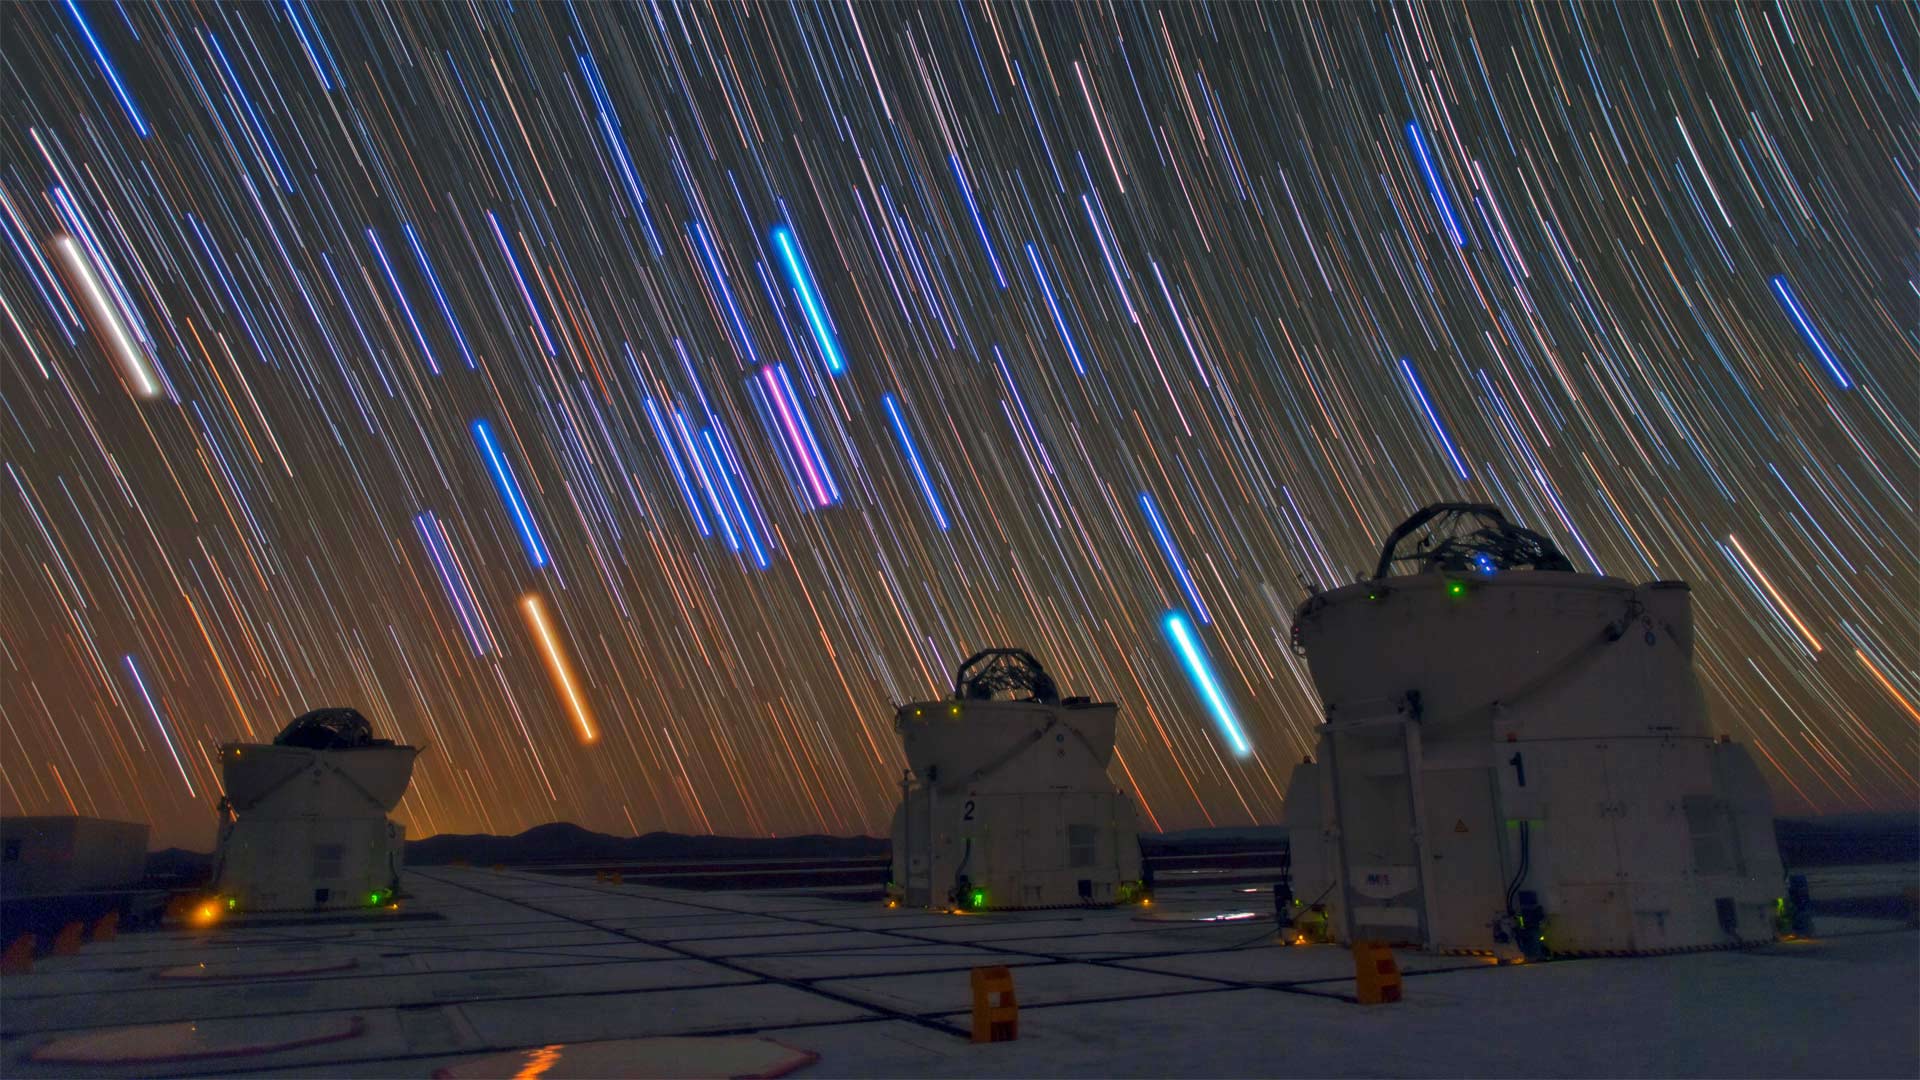 Telescopes and star trails at Paranal Observatory, Atacama Desert, Chile - Matteo Omied/Alamy)